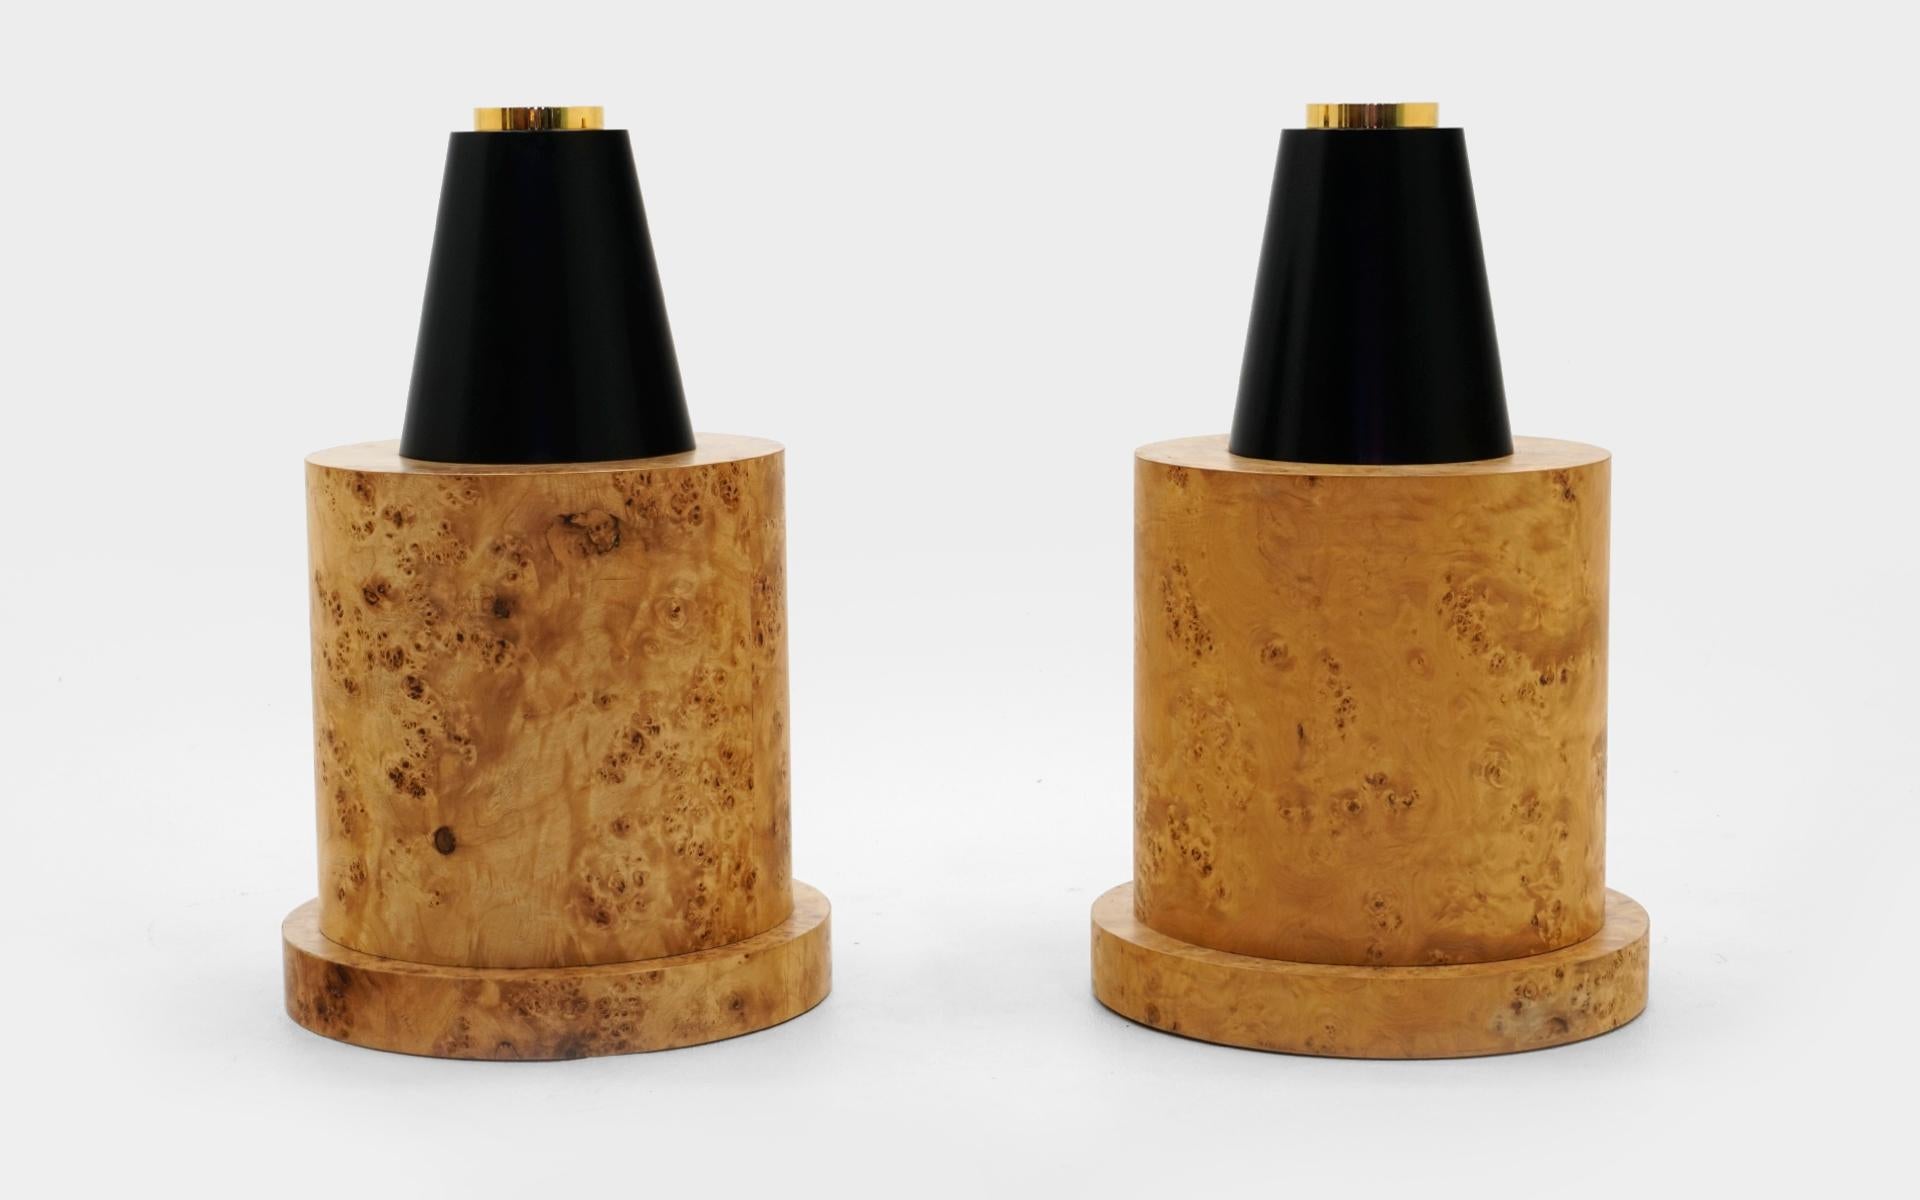 Two large vases made of burl wood, black and brass designed by Ettore Sottsass for his 